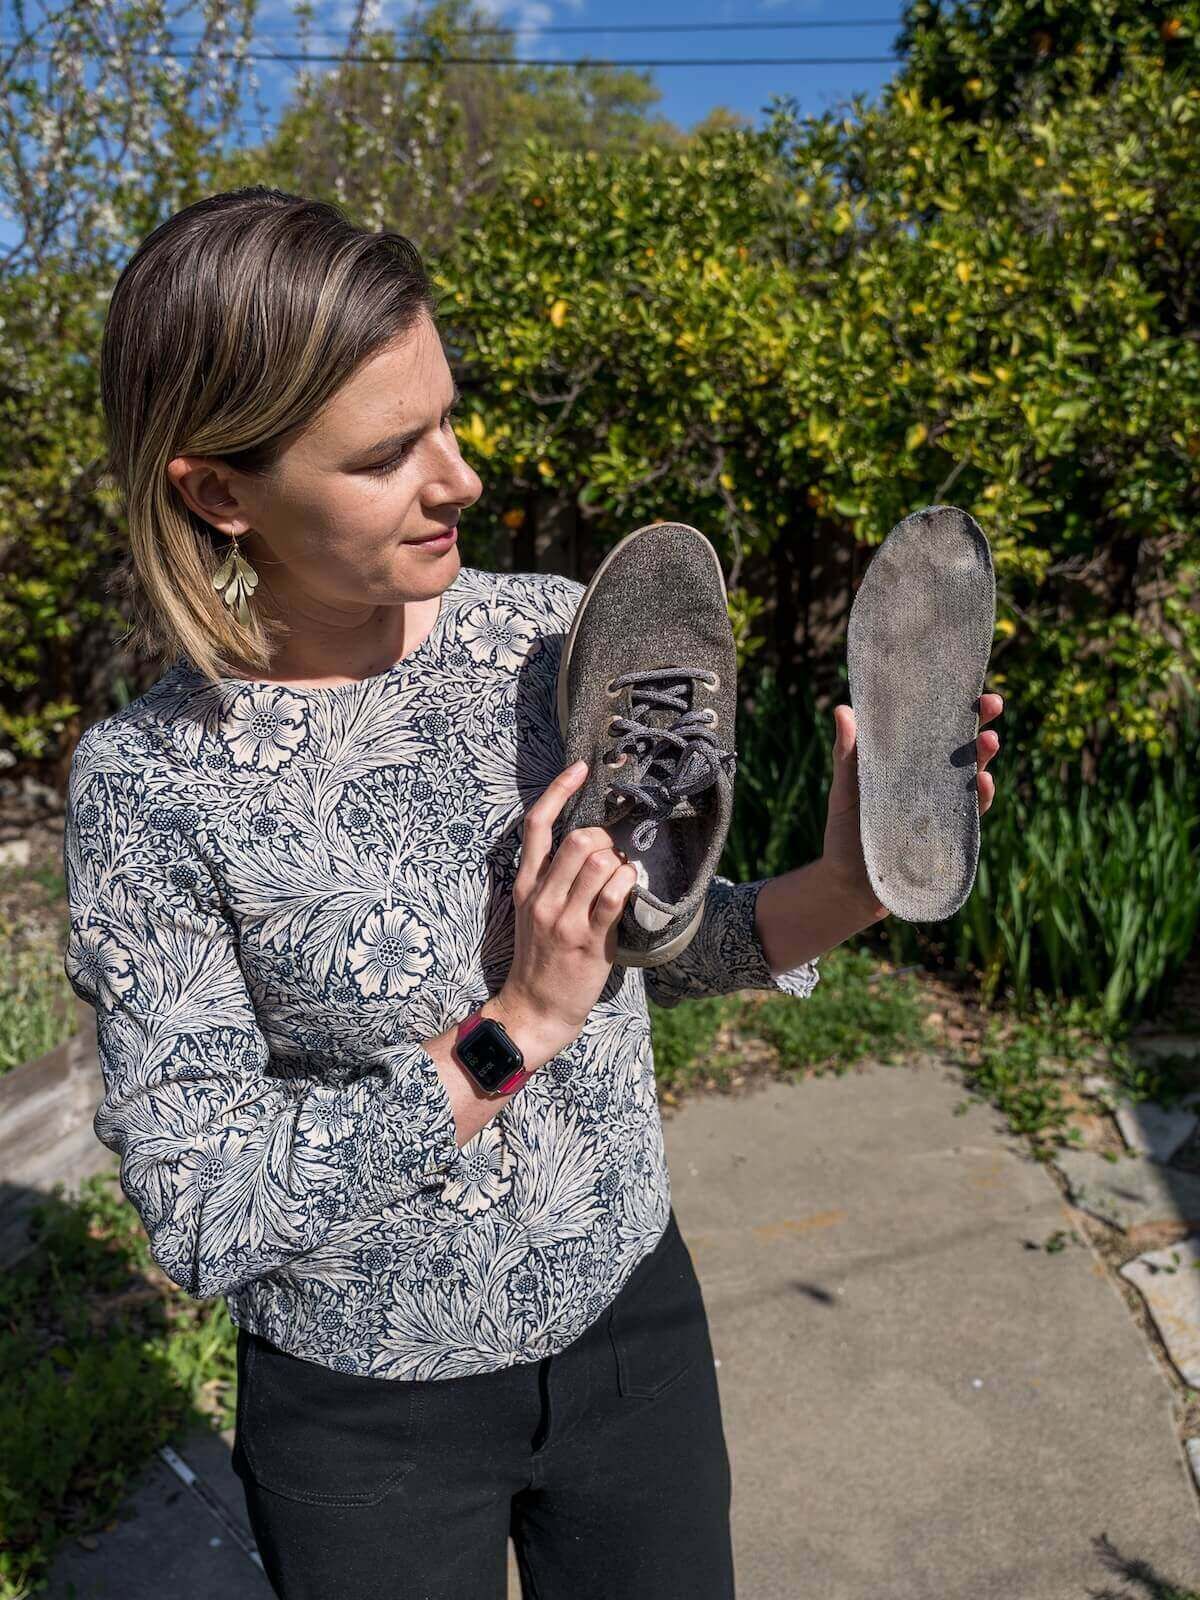 A woman in a grey floral-patterned shirt holds up a grey sneaker and its insole with a lush garden behind her.